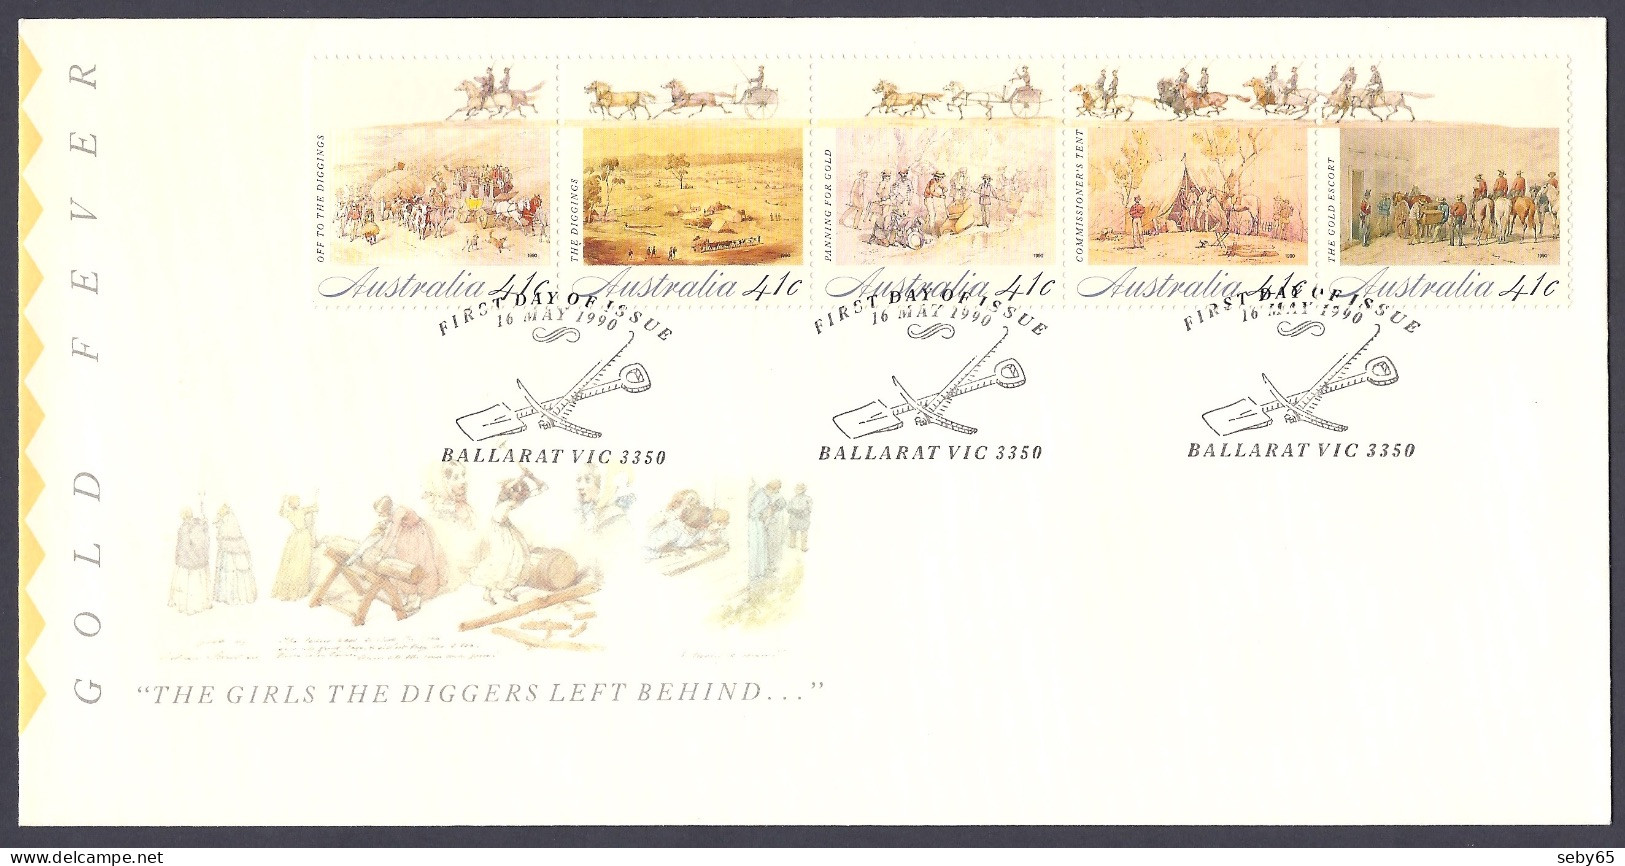 Australia 1990 - Gold Fever, Mining, Horses, Panning For Gold - FDC - Primo Giorno D'emissione (FDC)